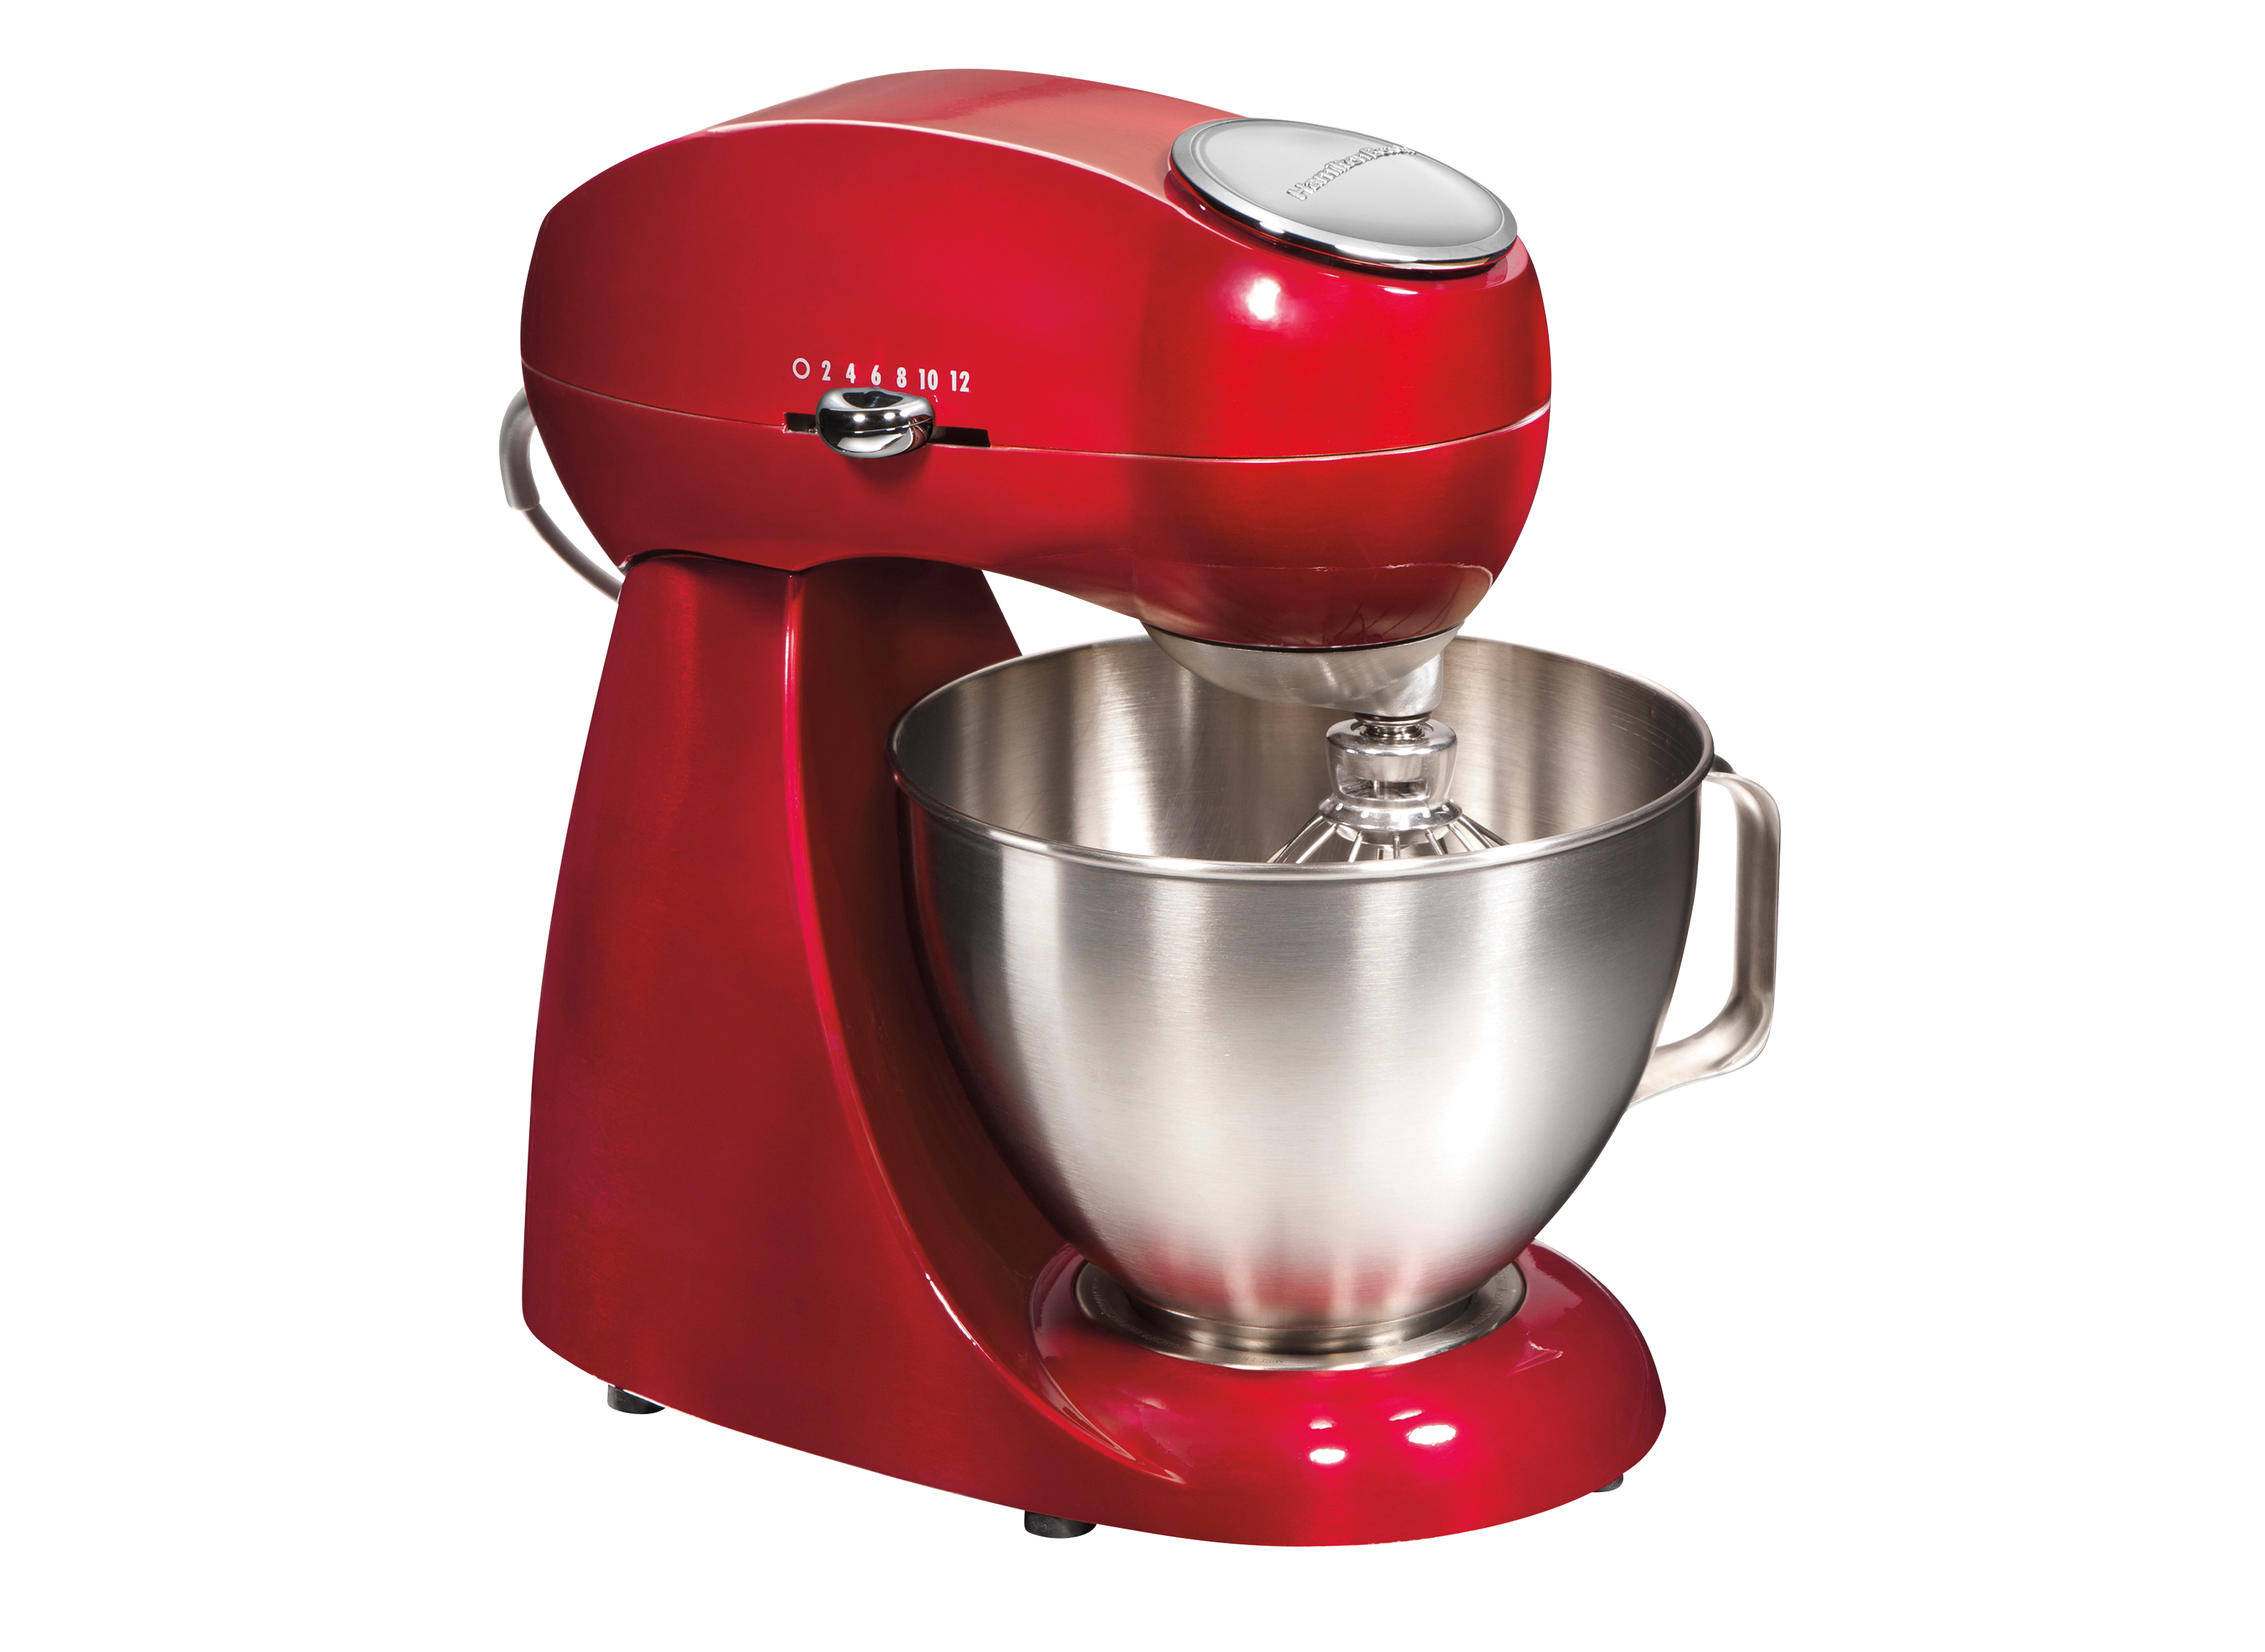 https://crdms.images.consumerreports.org/prod/products/cr/models/406957-stand-mixers-hamilton-beach-eclectrics-all-metal-63232-10030110.png